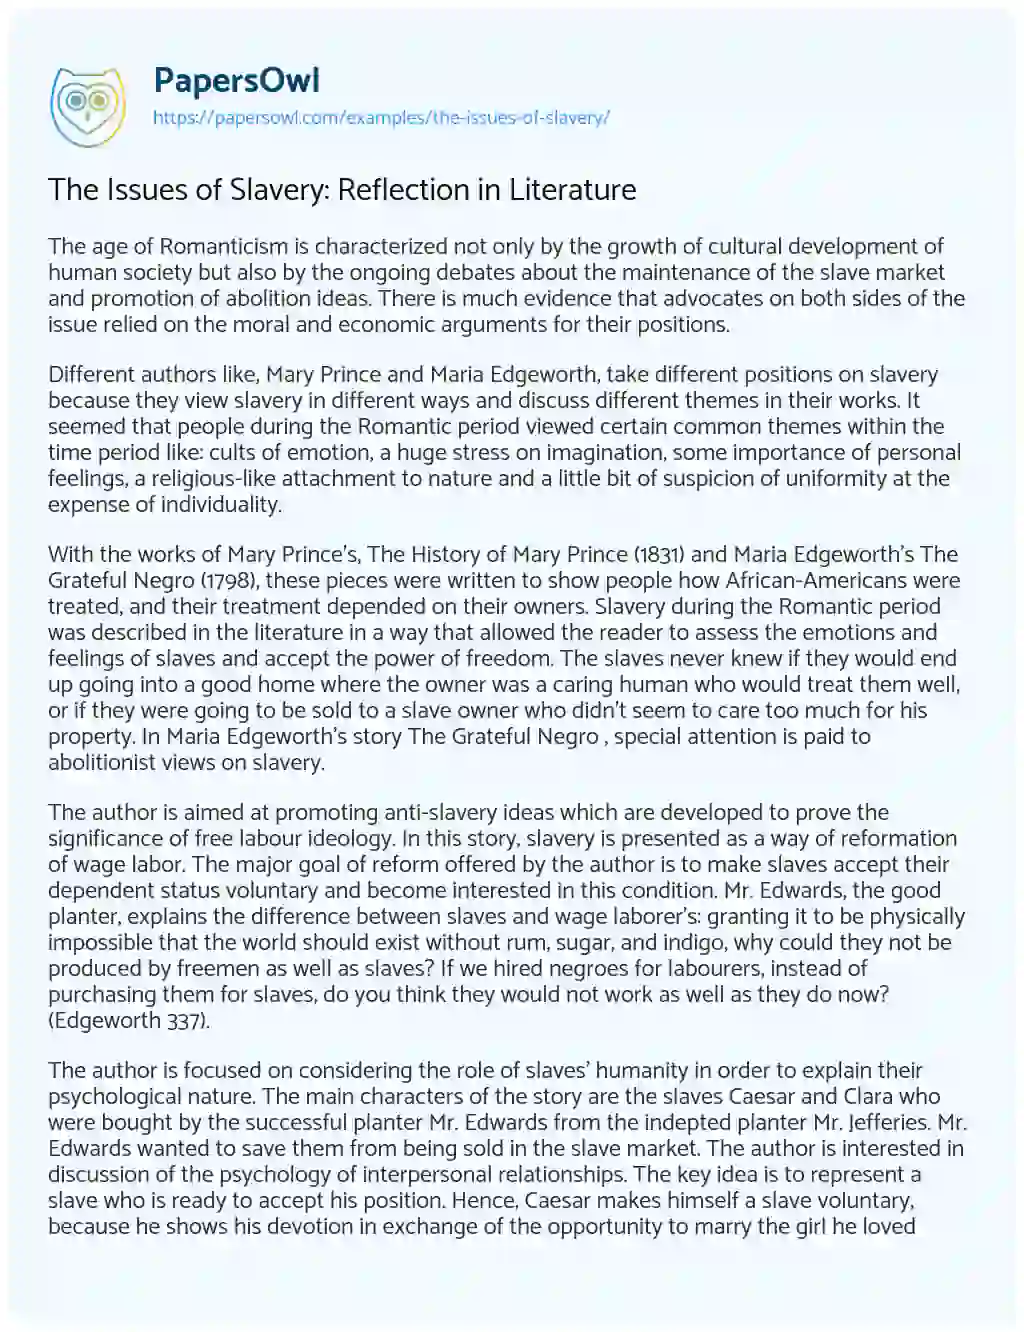 Essay on The Issues of Slavery: Reflection in Literature